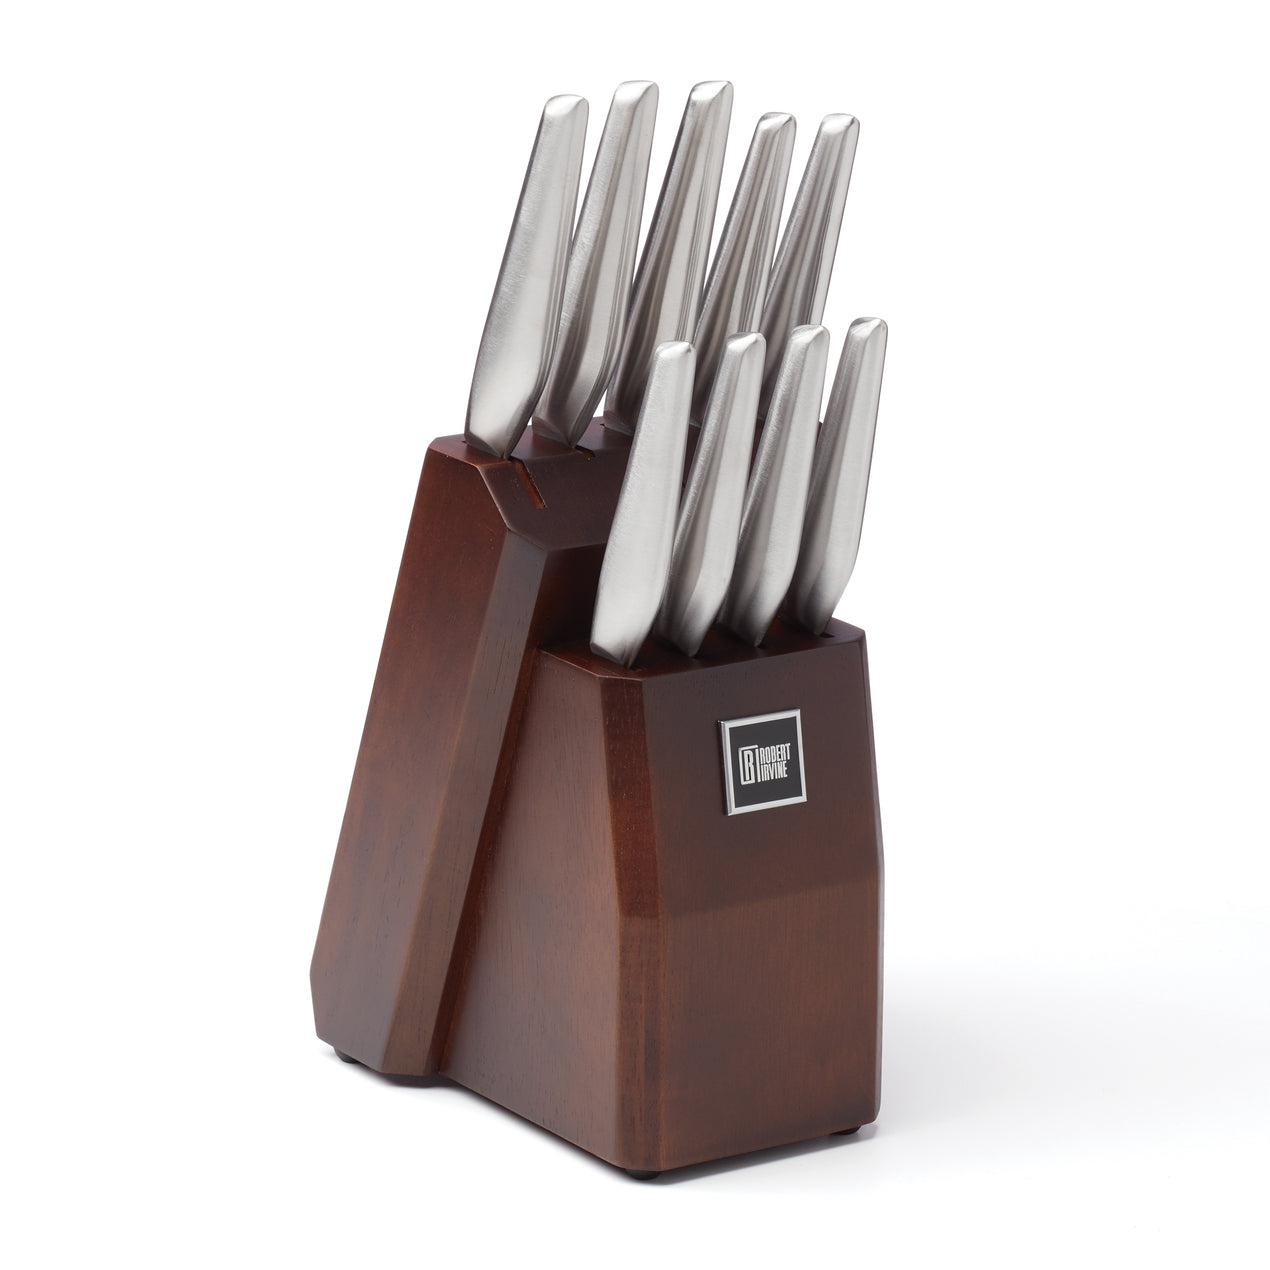 Kitchen Knife Set With Wooden Block, 16 Pieces Knives Set With